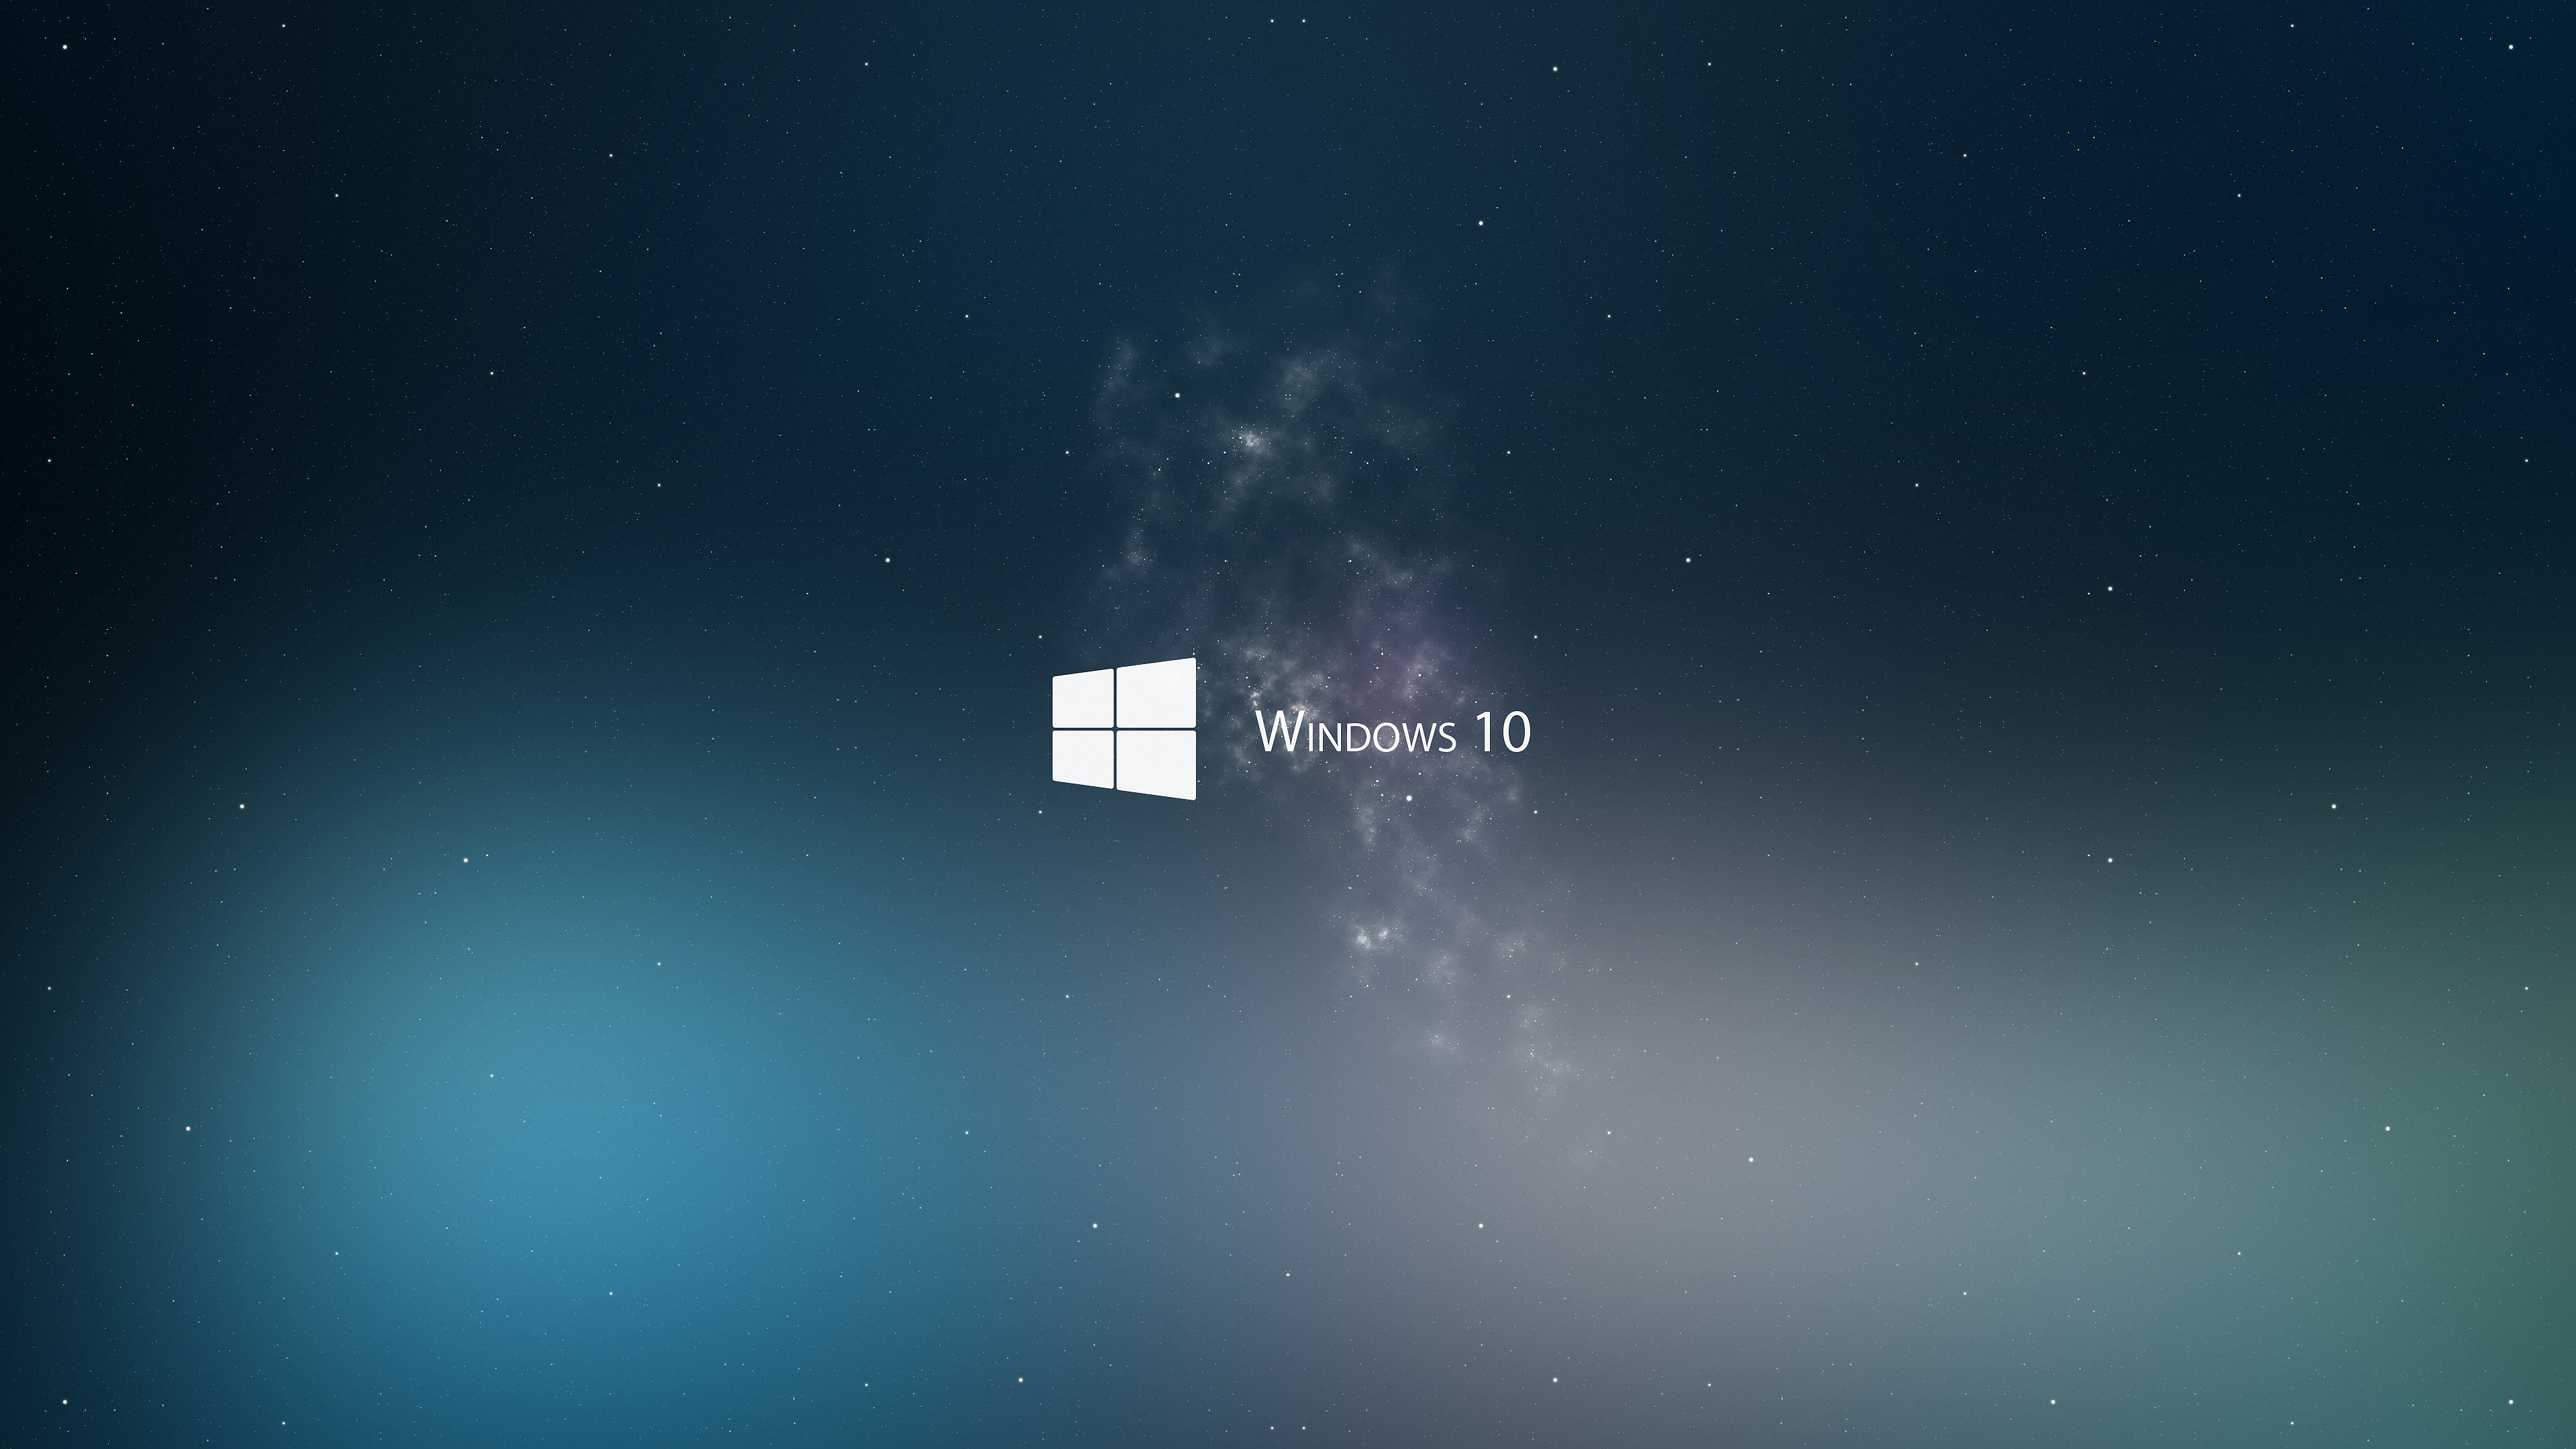 Windows Wallpaper And Background Image